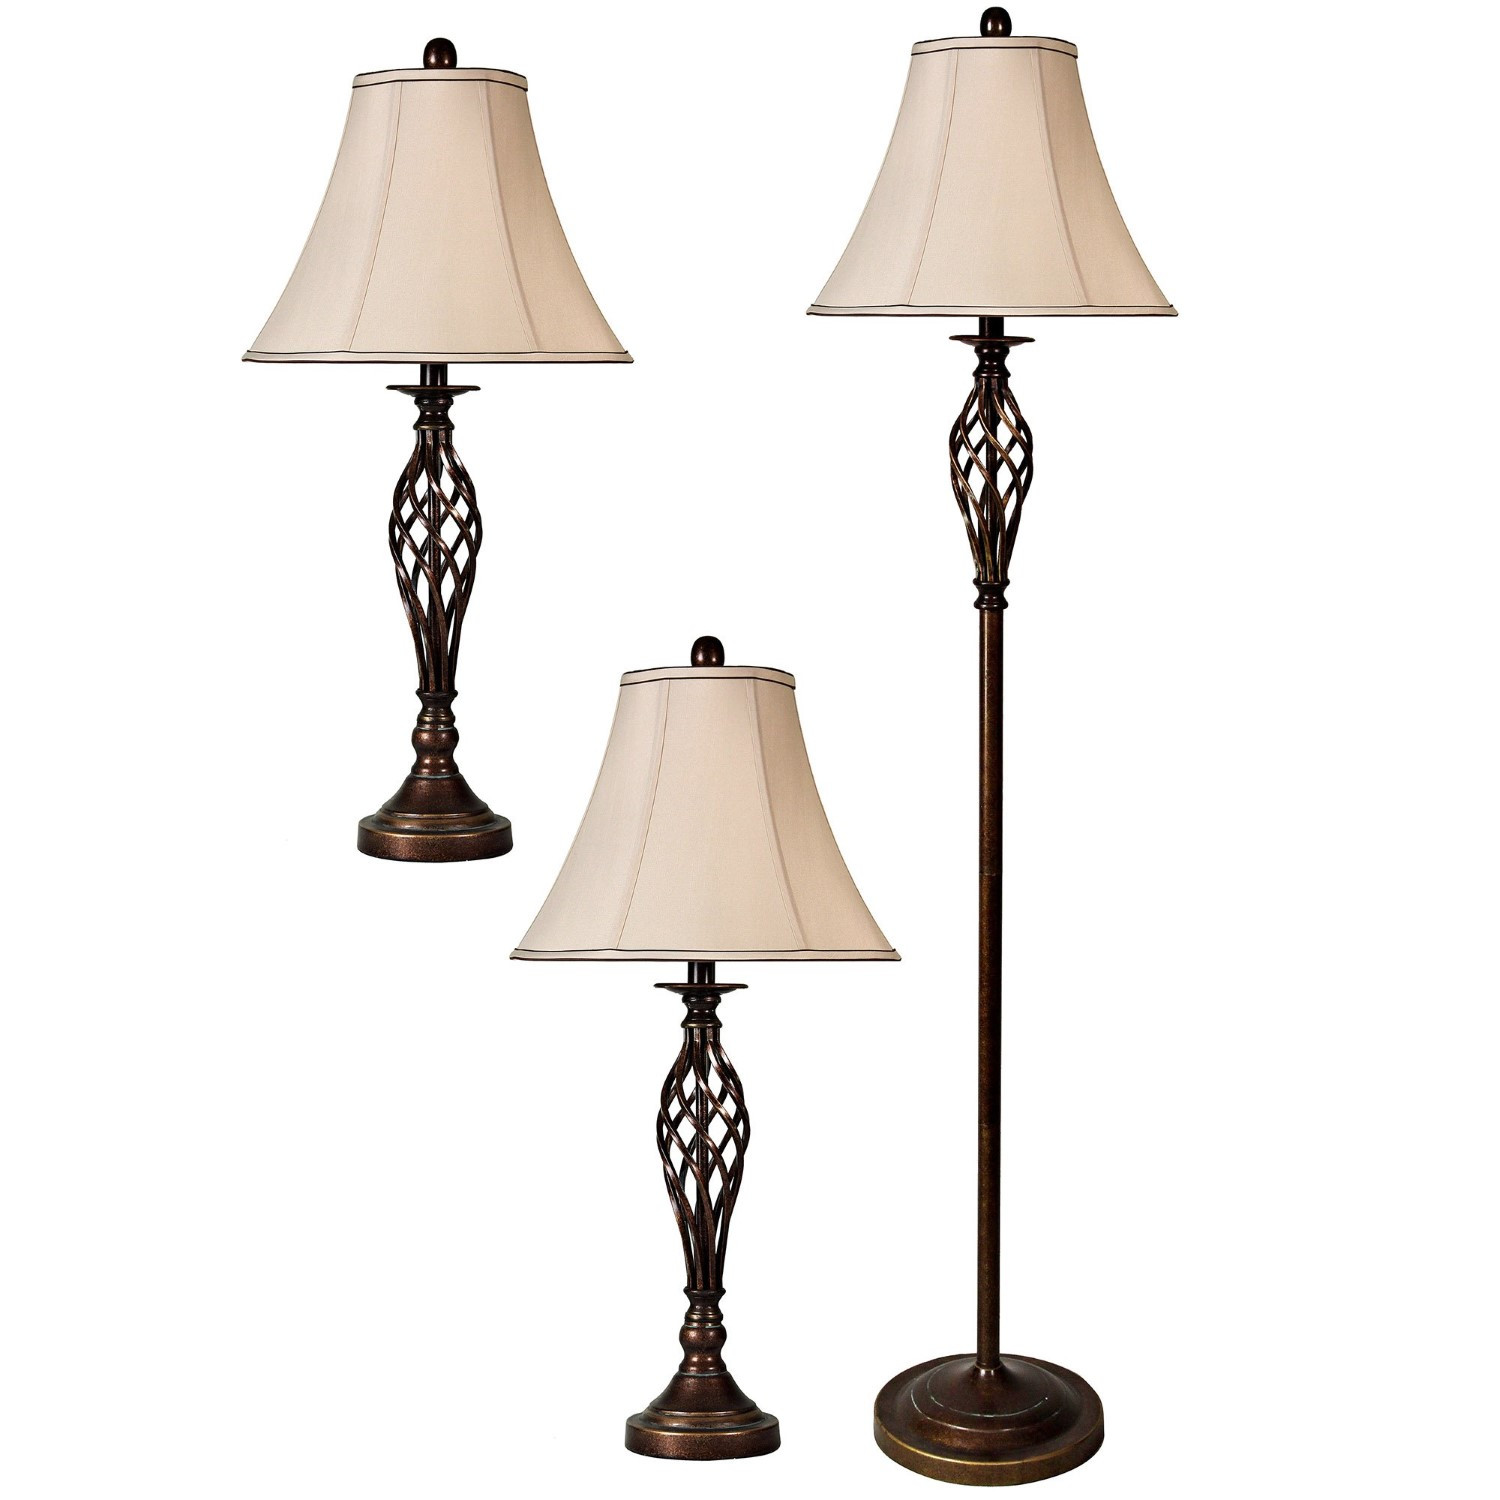 Living Room Table Lamp
 StyleCraft Barclay Brass 3 Piece Living Room Accent Table